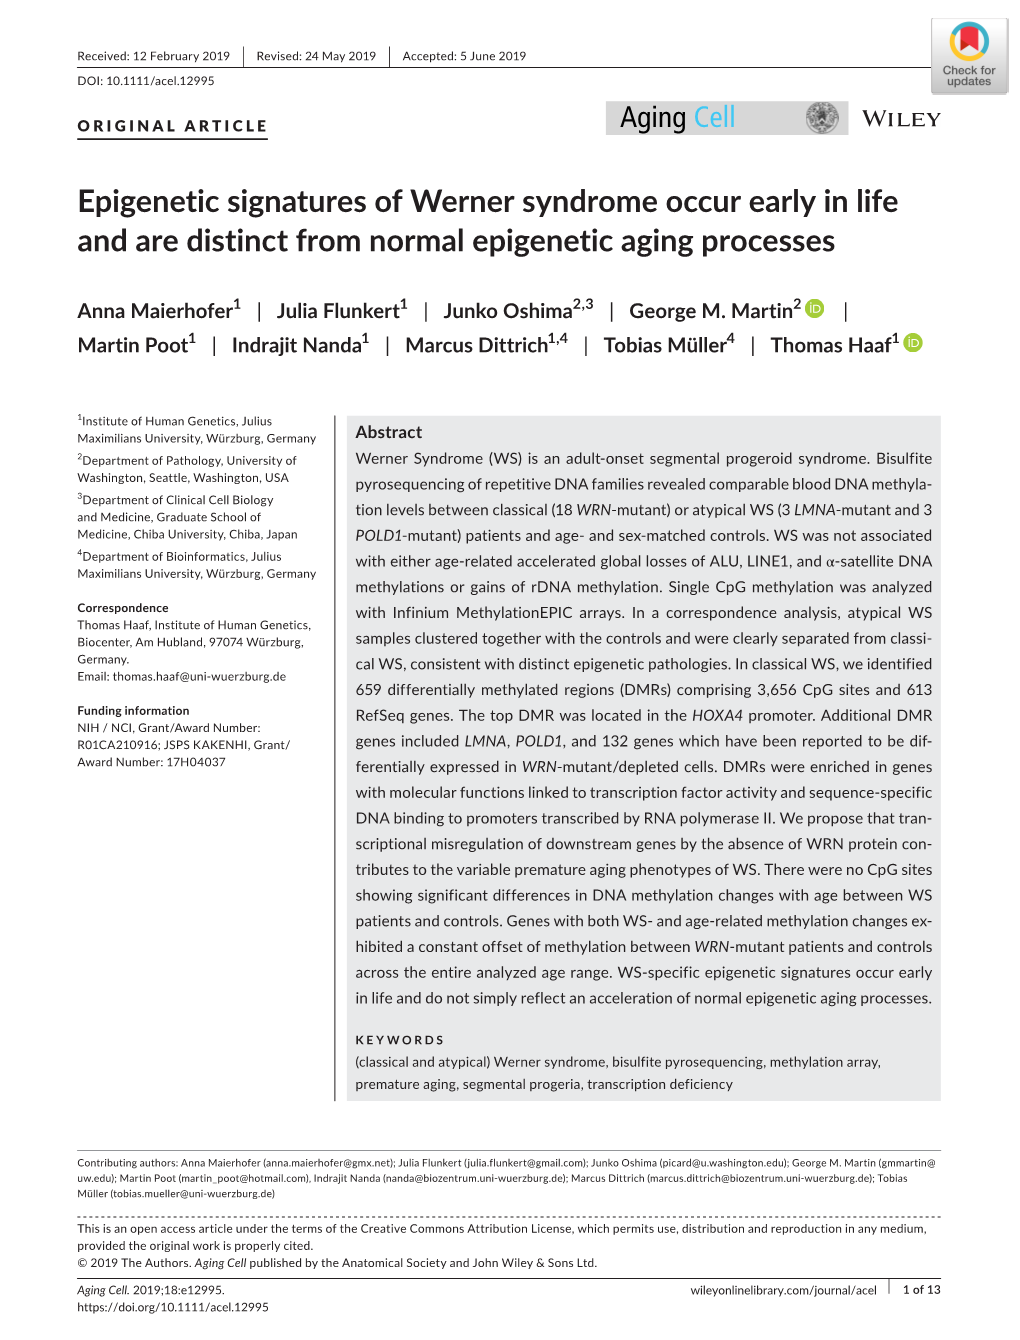 Epigenetic Signatures of Werner Syndrome Occur Early in Life and Are Distinct from Normal Epigenetic Aging Processes